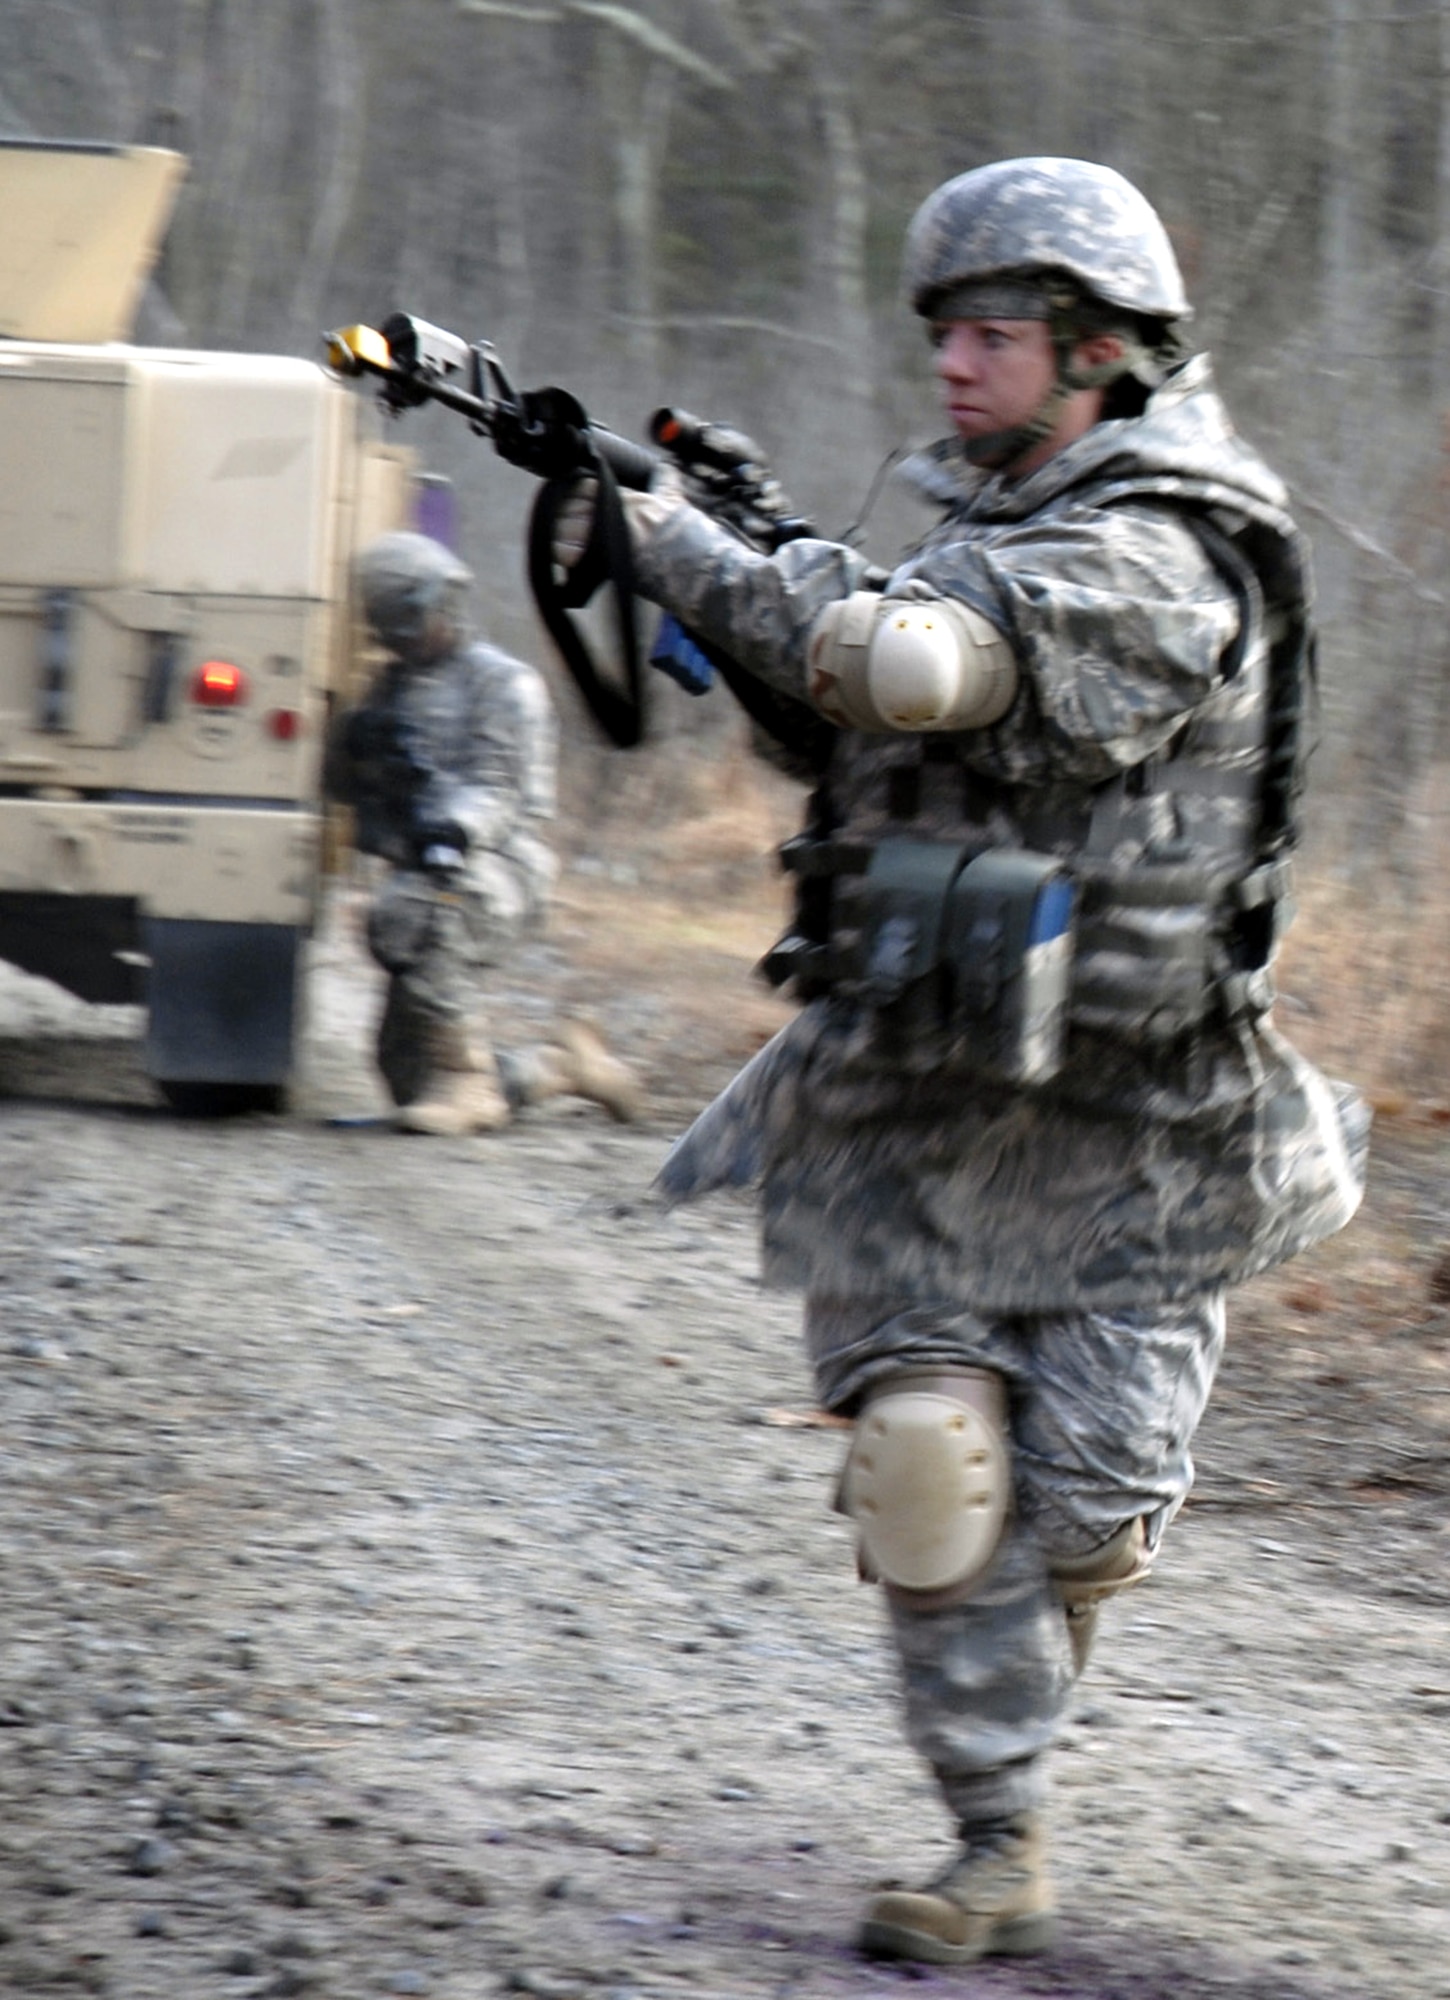 A student in the Air Force Phoenix Warrior Training Course responds to "enemy action" during mounted and dismounted patrol (convoy) training on a Fort Dix, N.J., range Dec. 5, 2008.  The course, taught by the U.S. Air Force Expeditionary Center's 421st Combat Training Squadron, prepares Air Force security forces for upcoming deployments.  (U.S. Air Force Photo/Staff Sgt. Paul R. Evans)